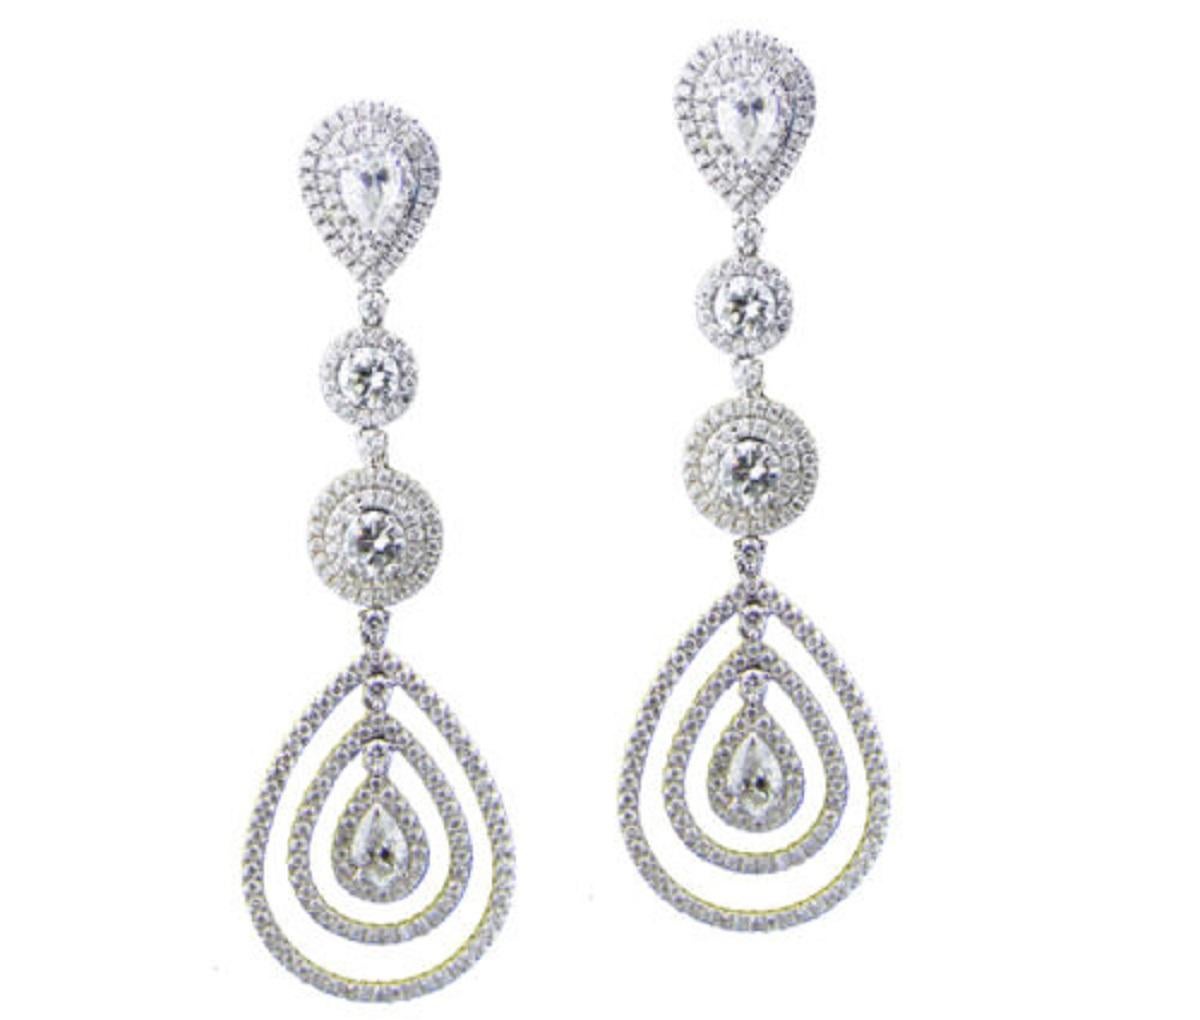 DIAMOND CHANDELIER EARRINGS 6.00 CARATS TOTAL WEIGHT 18K WHITE GOLD

Round Diamonds Total Carat Weight 1.37 carats (With GIA Certificate)

Diamonds are G in Color and SI2 in Clarity 

Pear Shape Diamonds Total Carat Weight 1.80 carats

Diamonds are